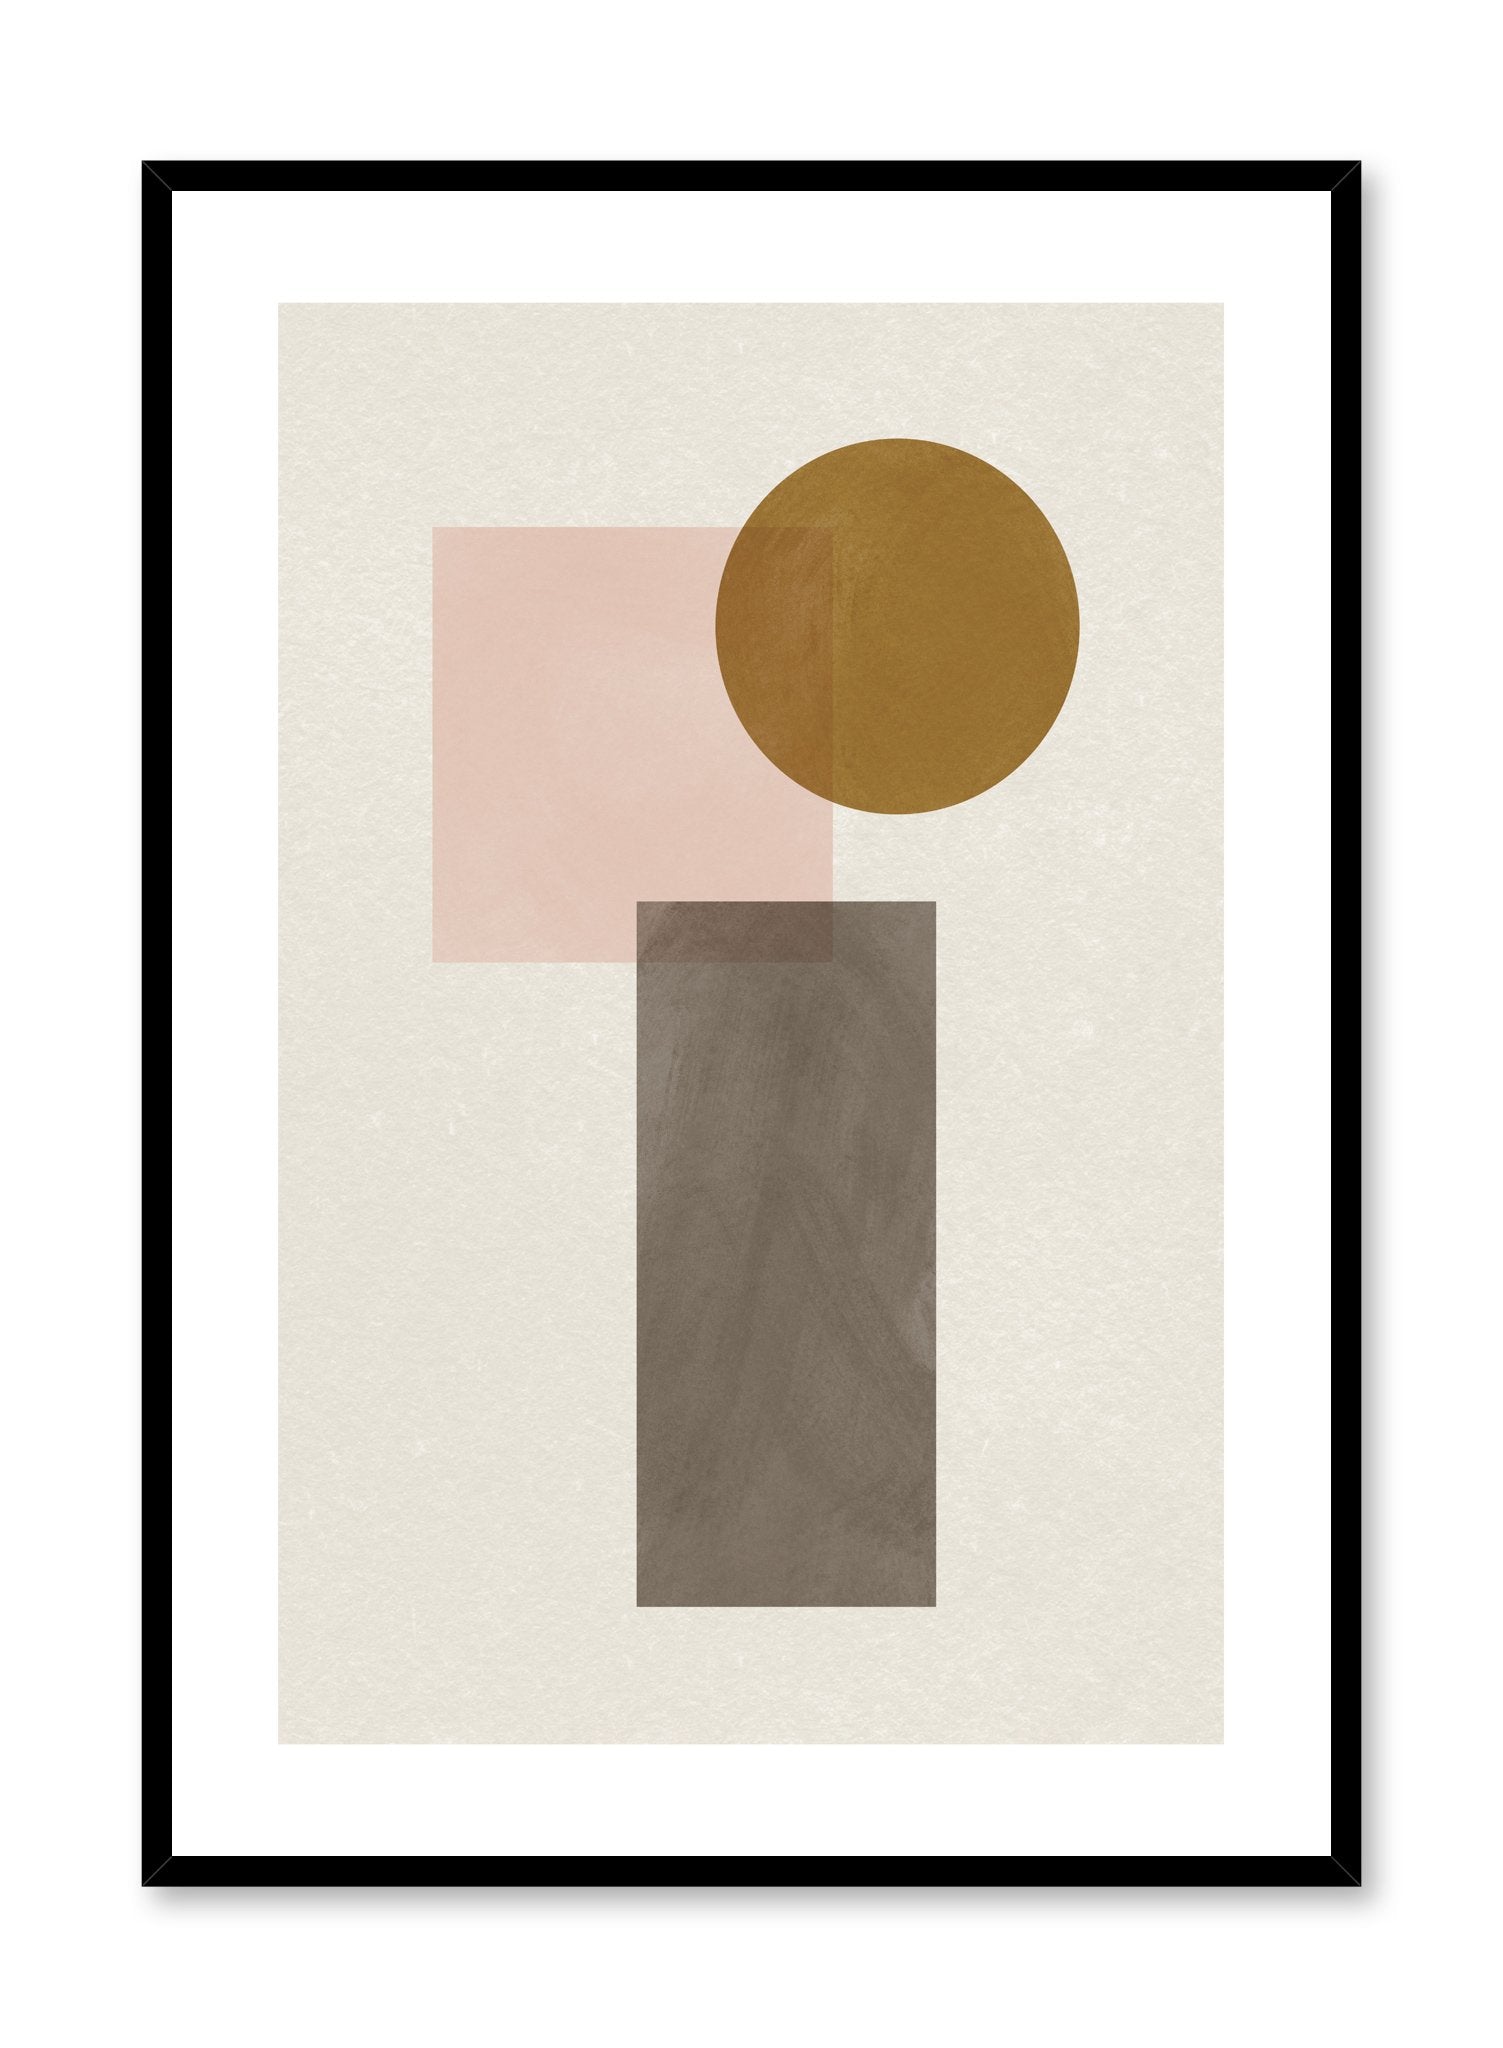 Modern abstract illustration poster by Opposite Wall with pastel coloured overlapping shapes by Toffie Affichiste